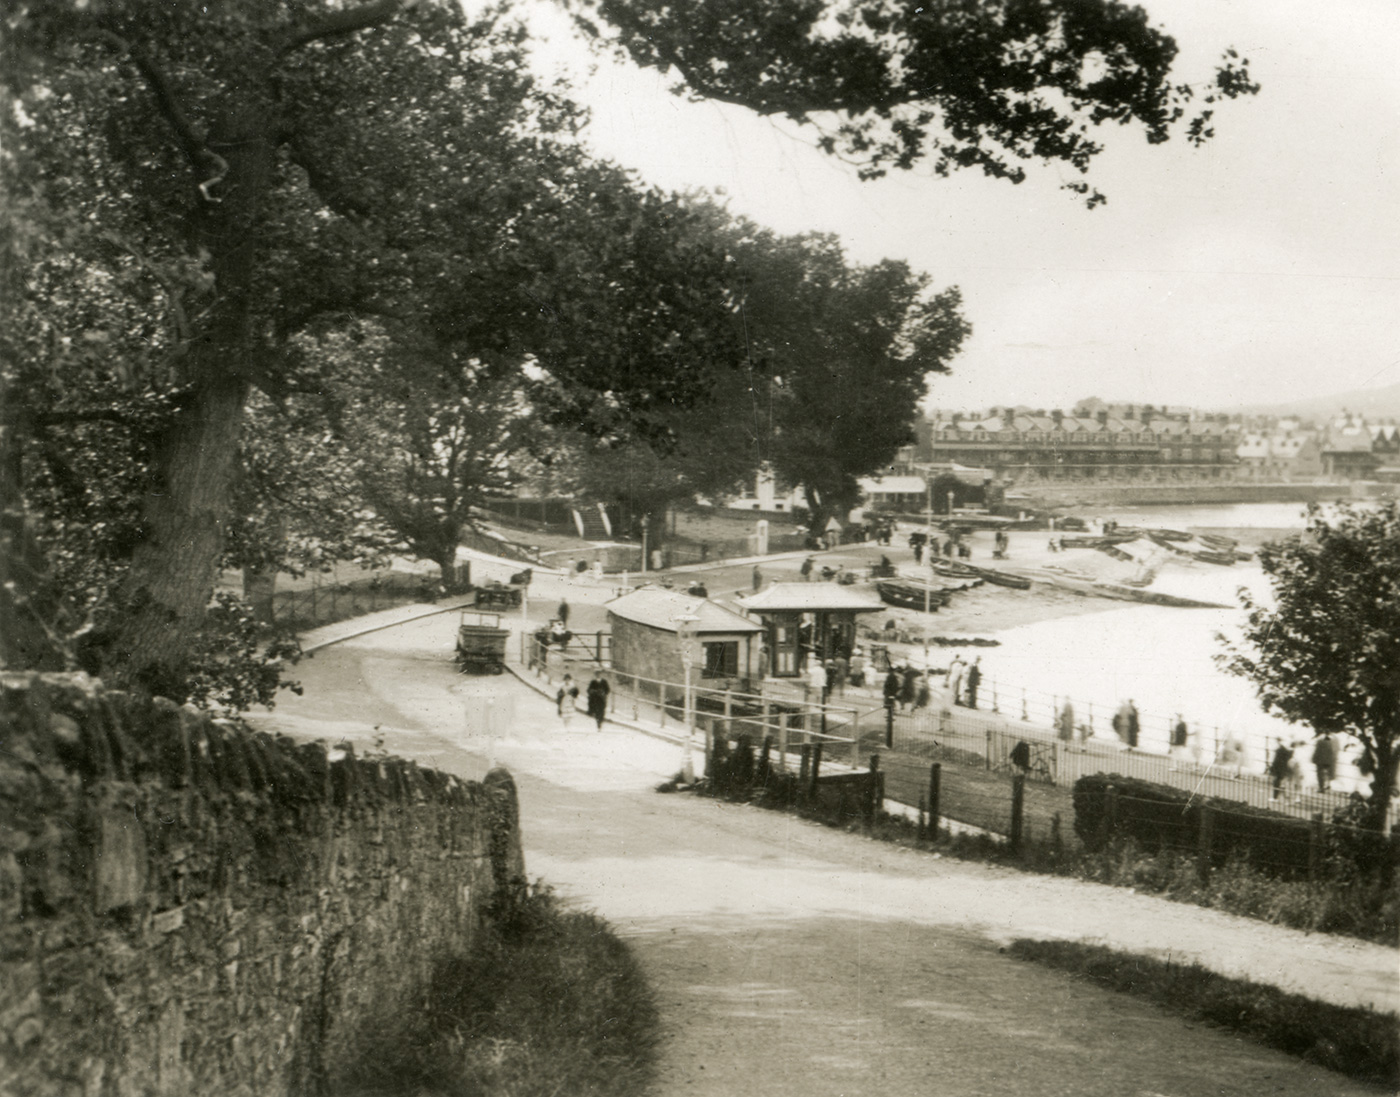 The Pier Entrance and Charabanc